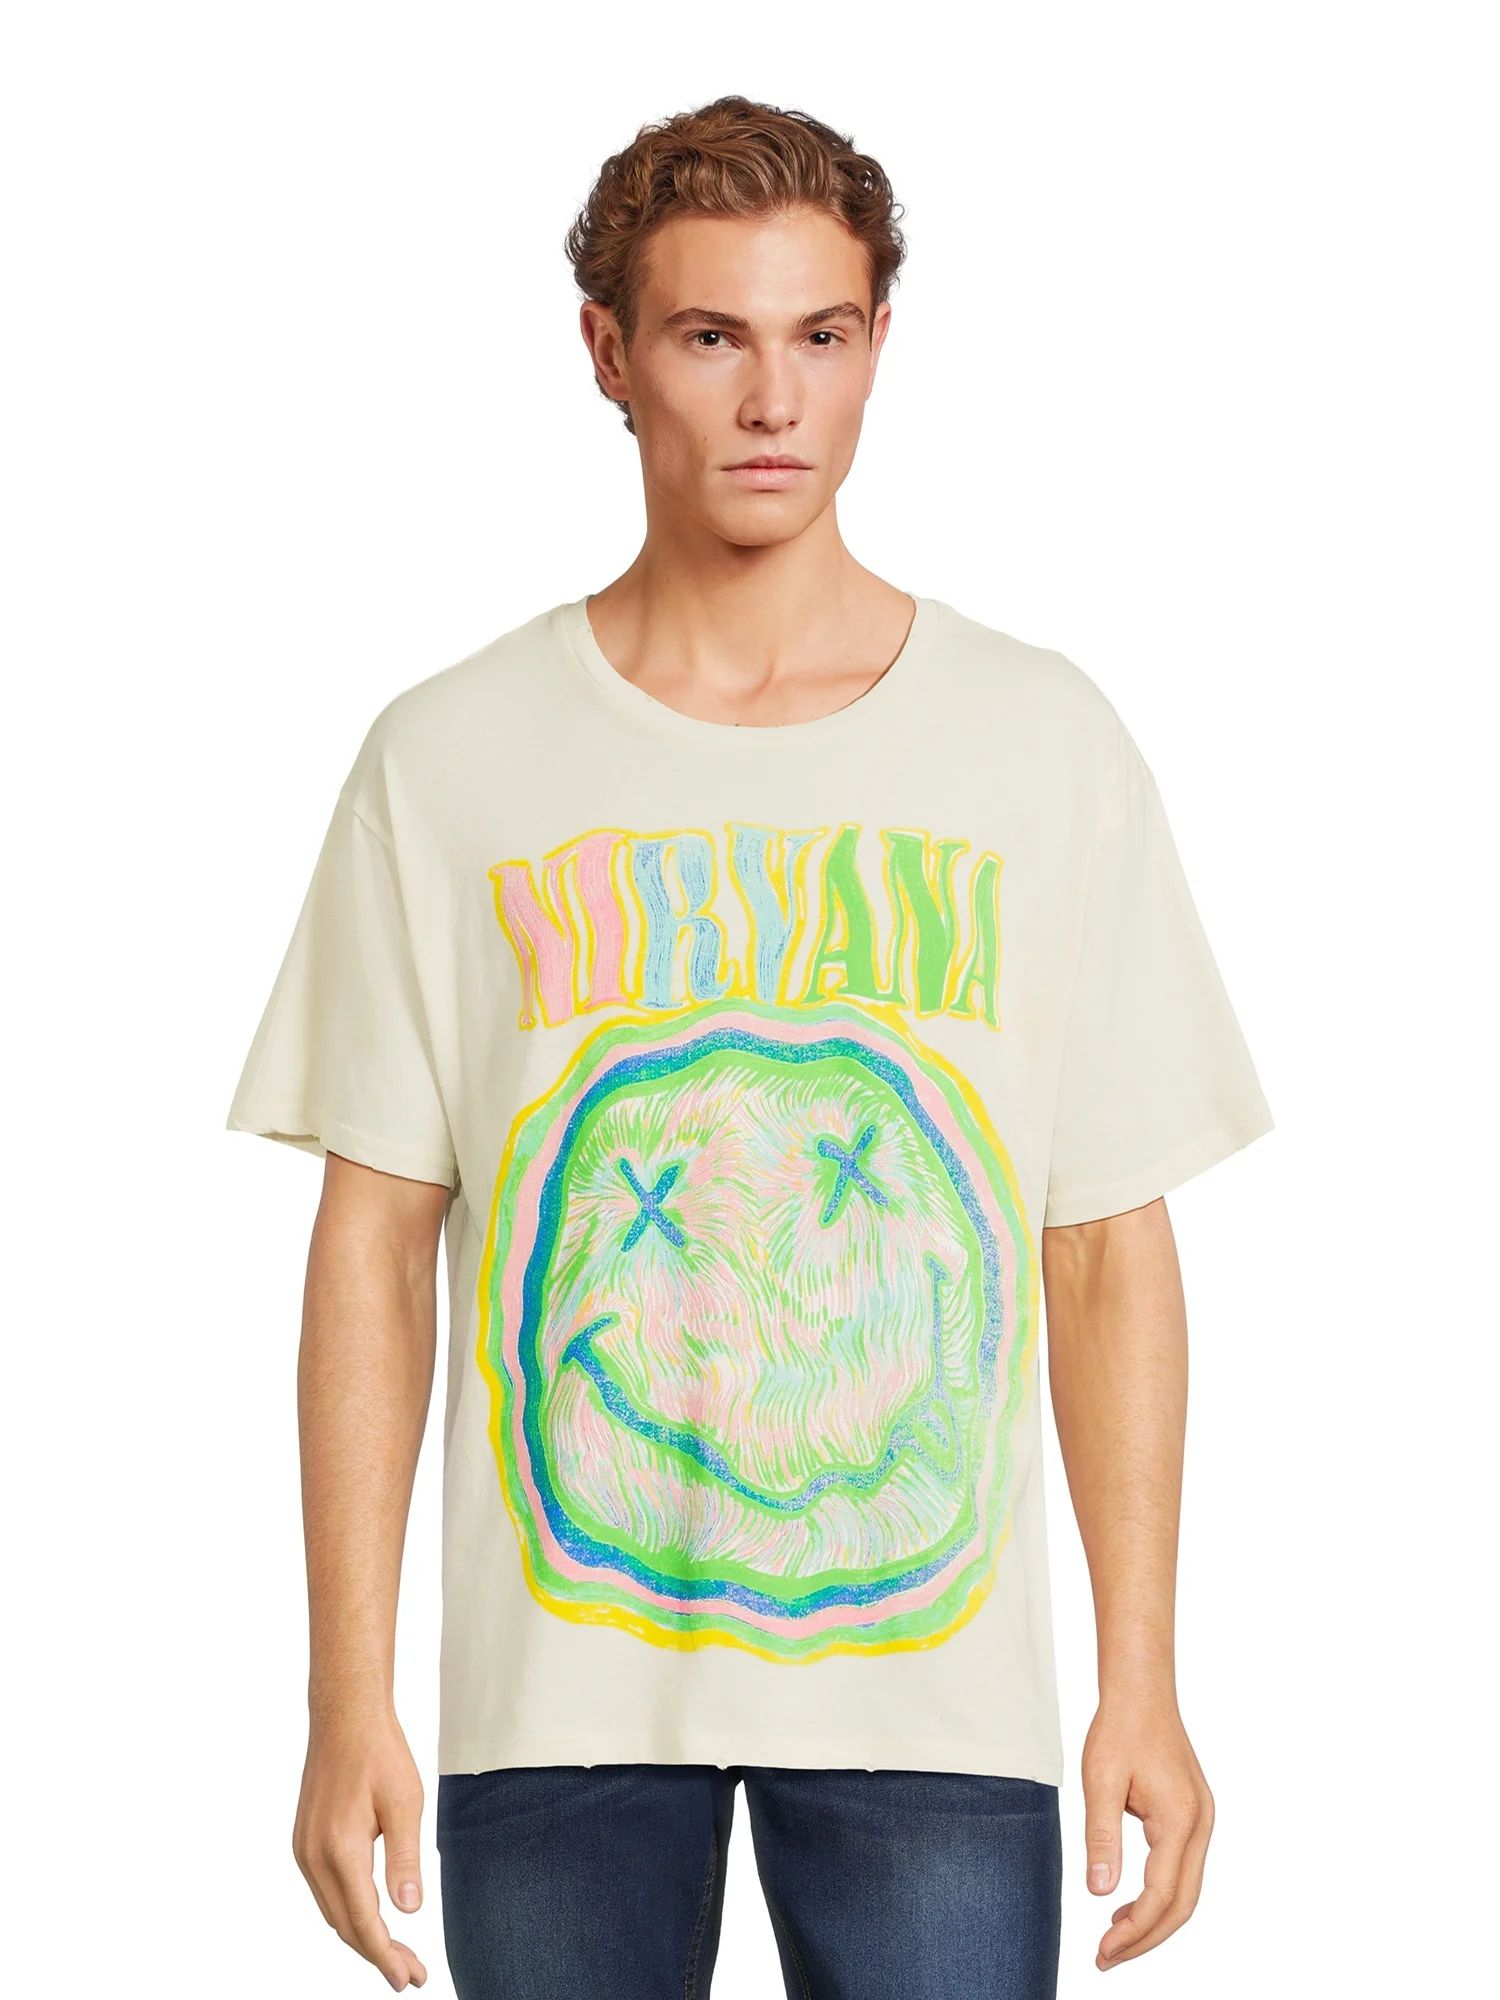 Nirvana Men's Graphic Band Tee with Short Sleeves, Sizes XS-3XL | Walmart (US)